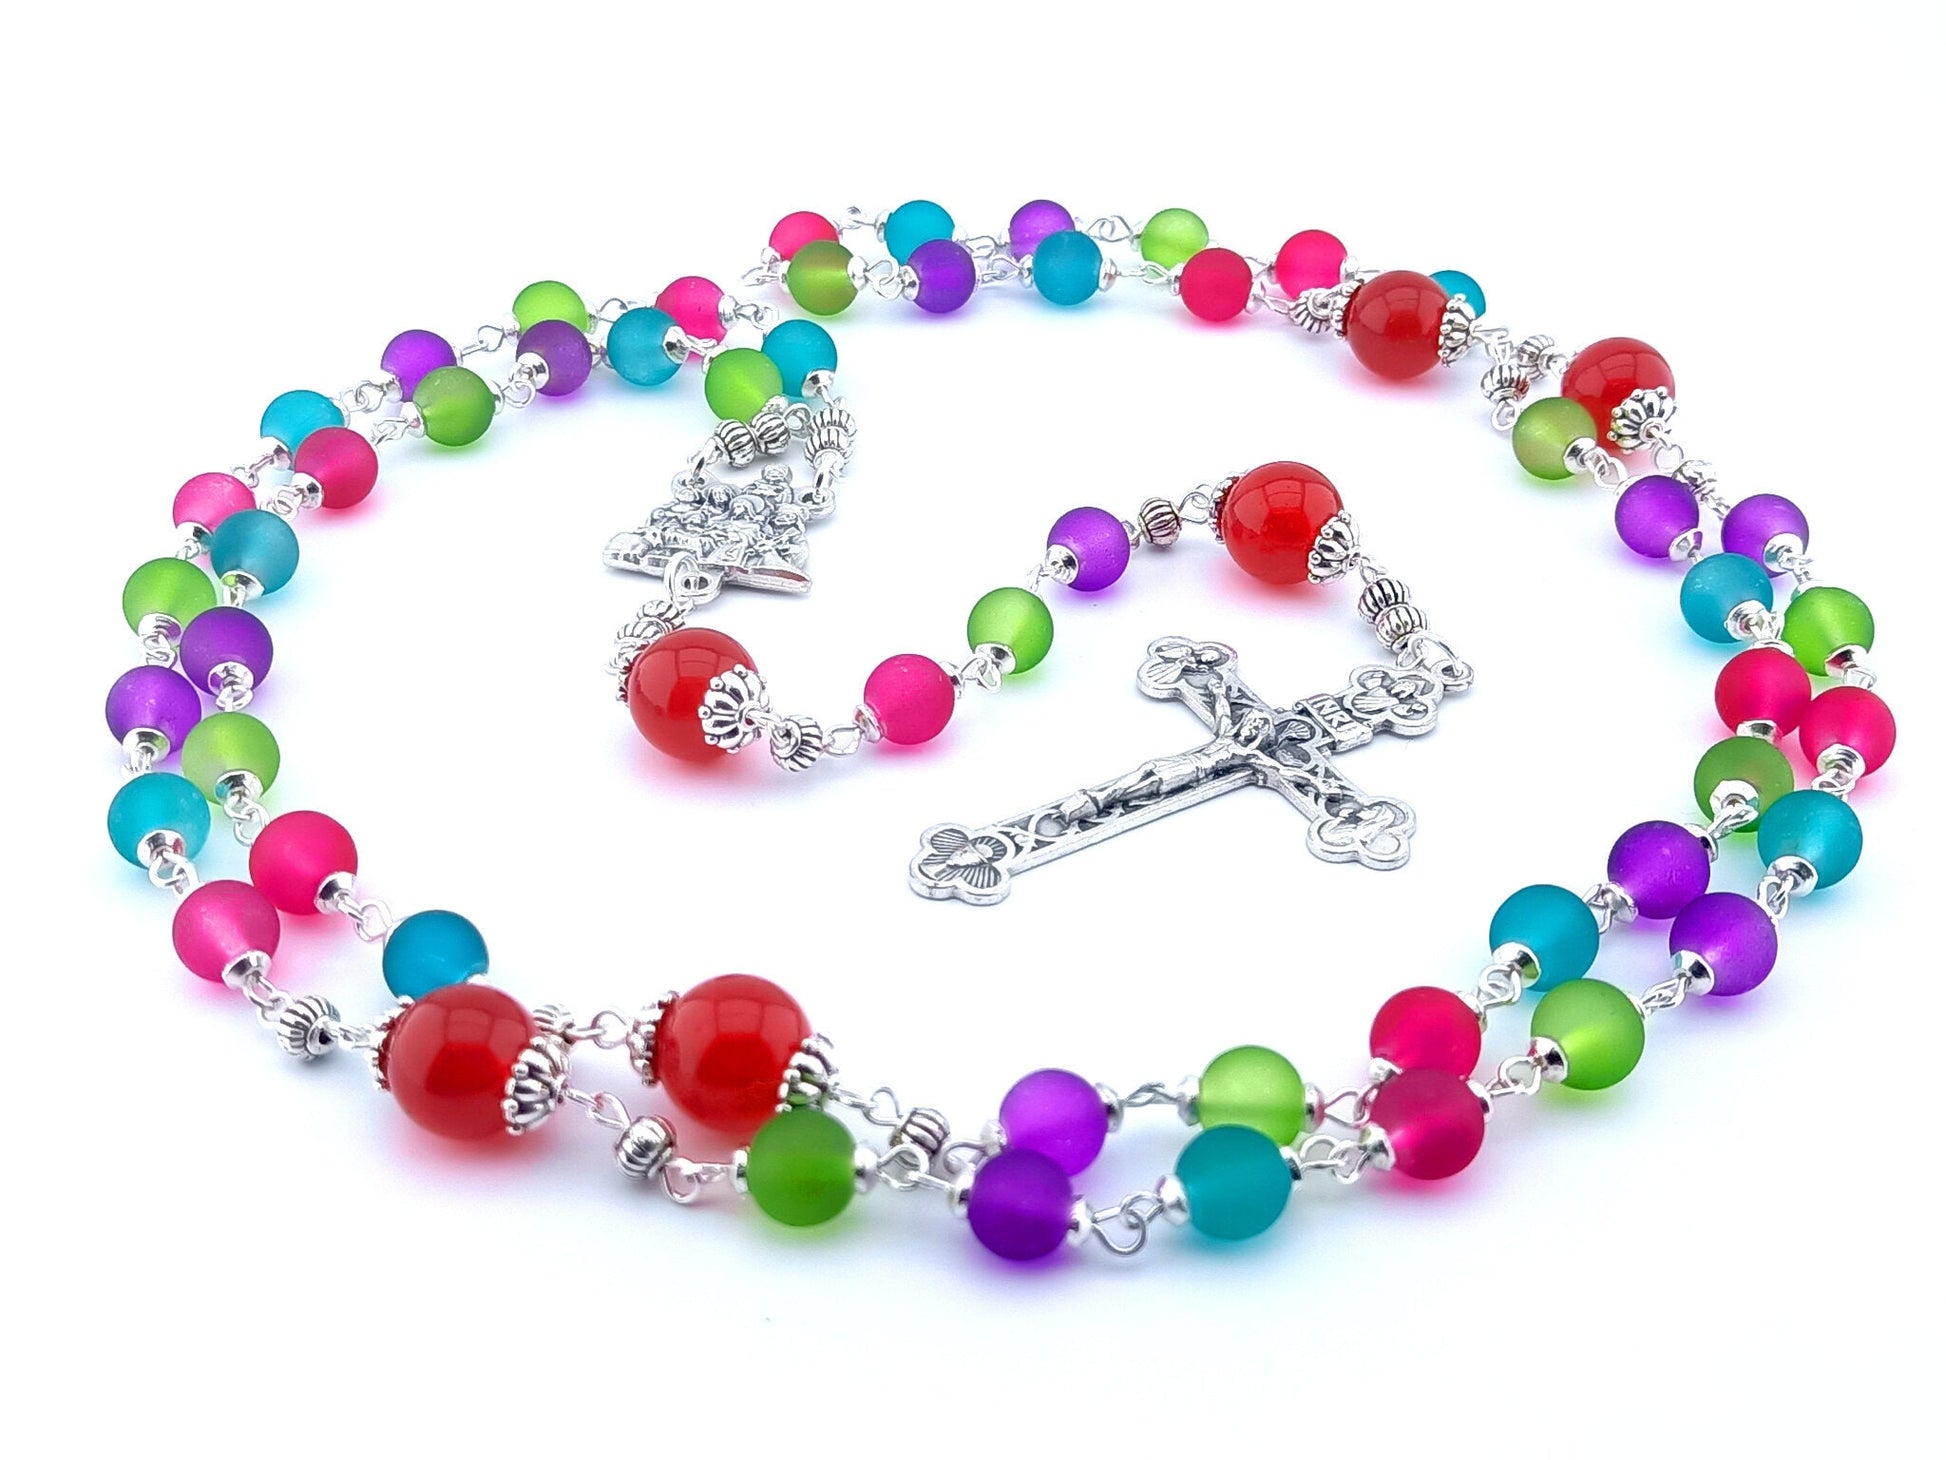 The Nativity unique rosary beads with multicoloured glass beads, silver Holy Spirit crucifix, Nativity centre medal and silver linking beads.